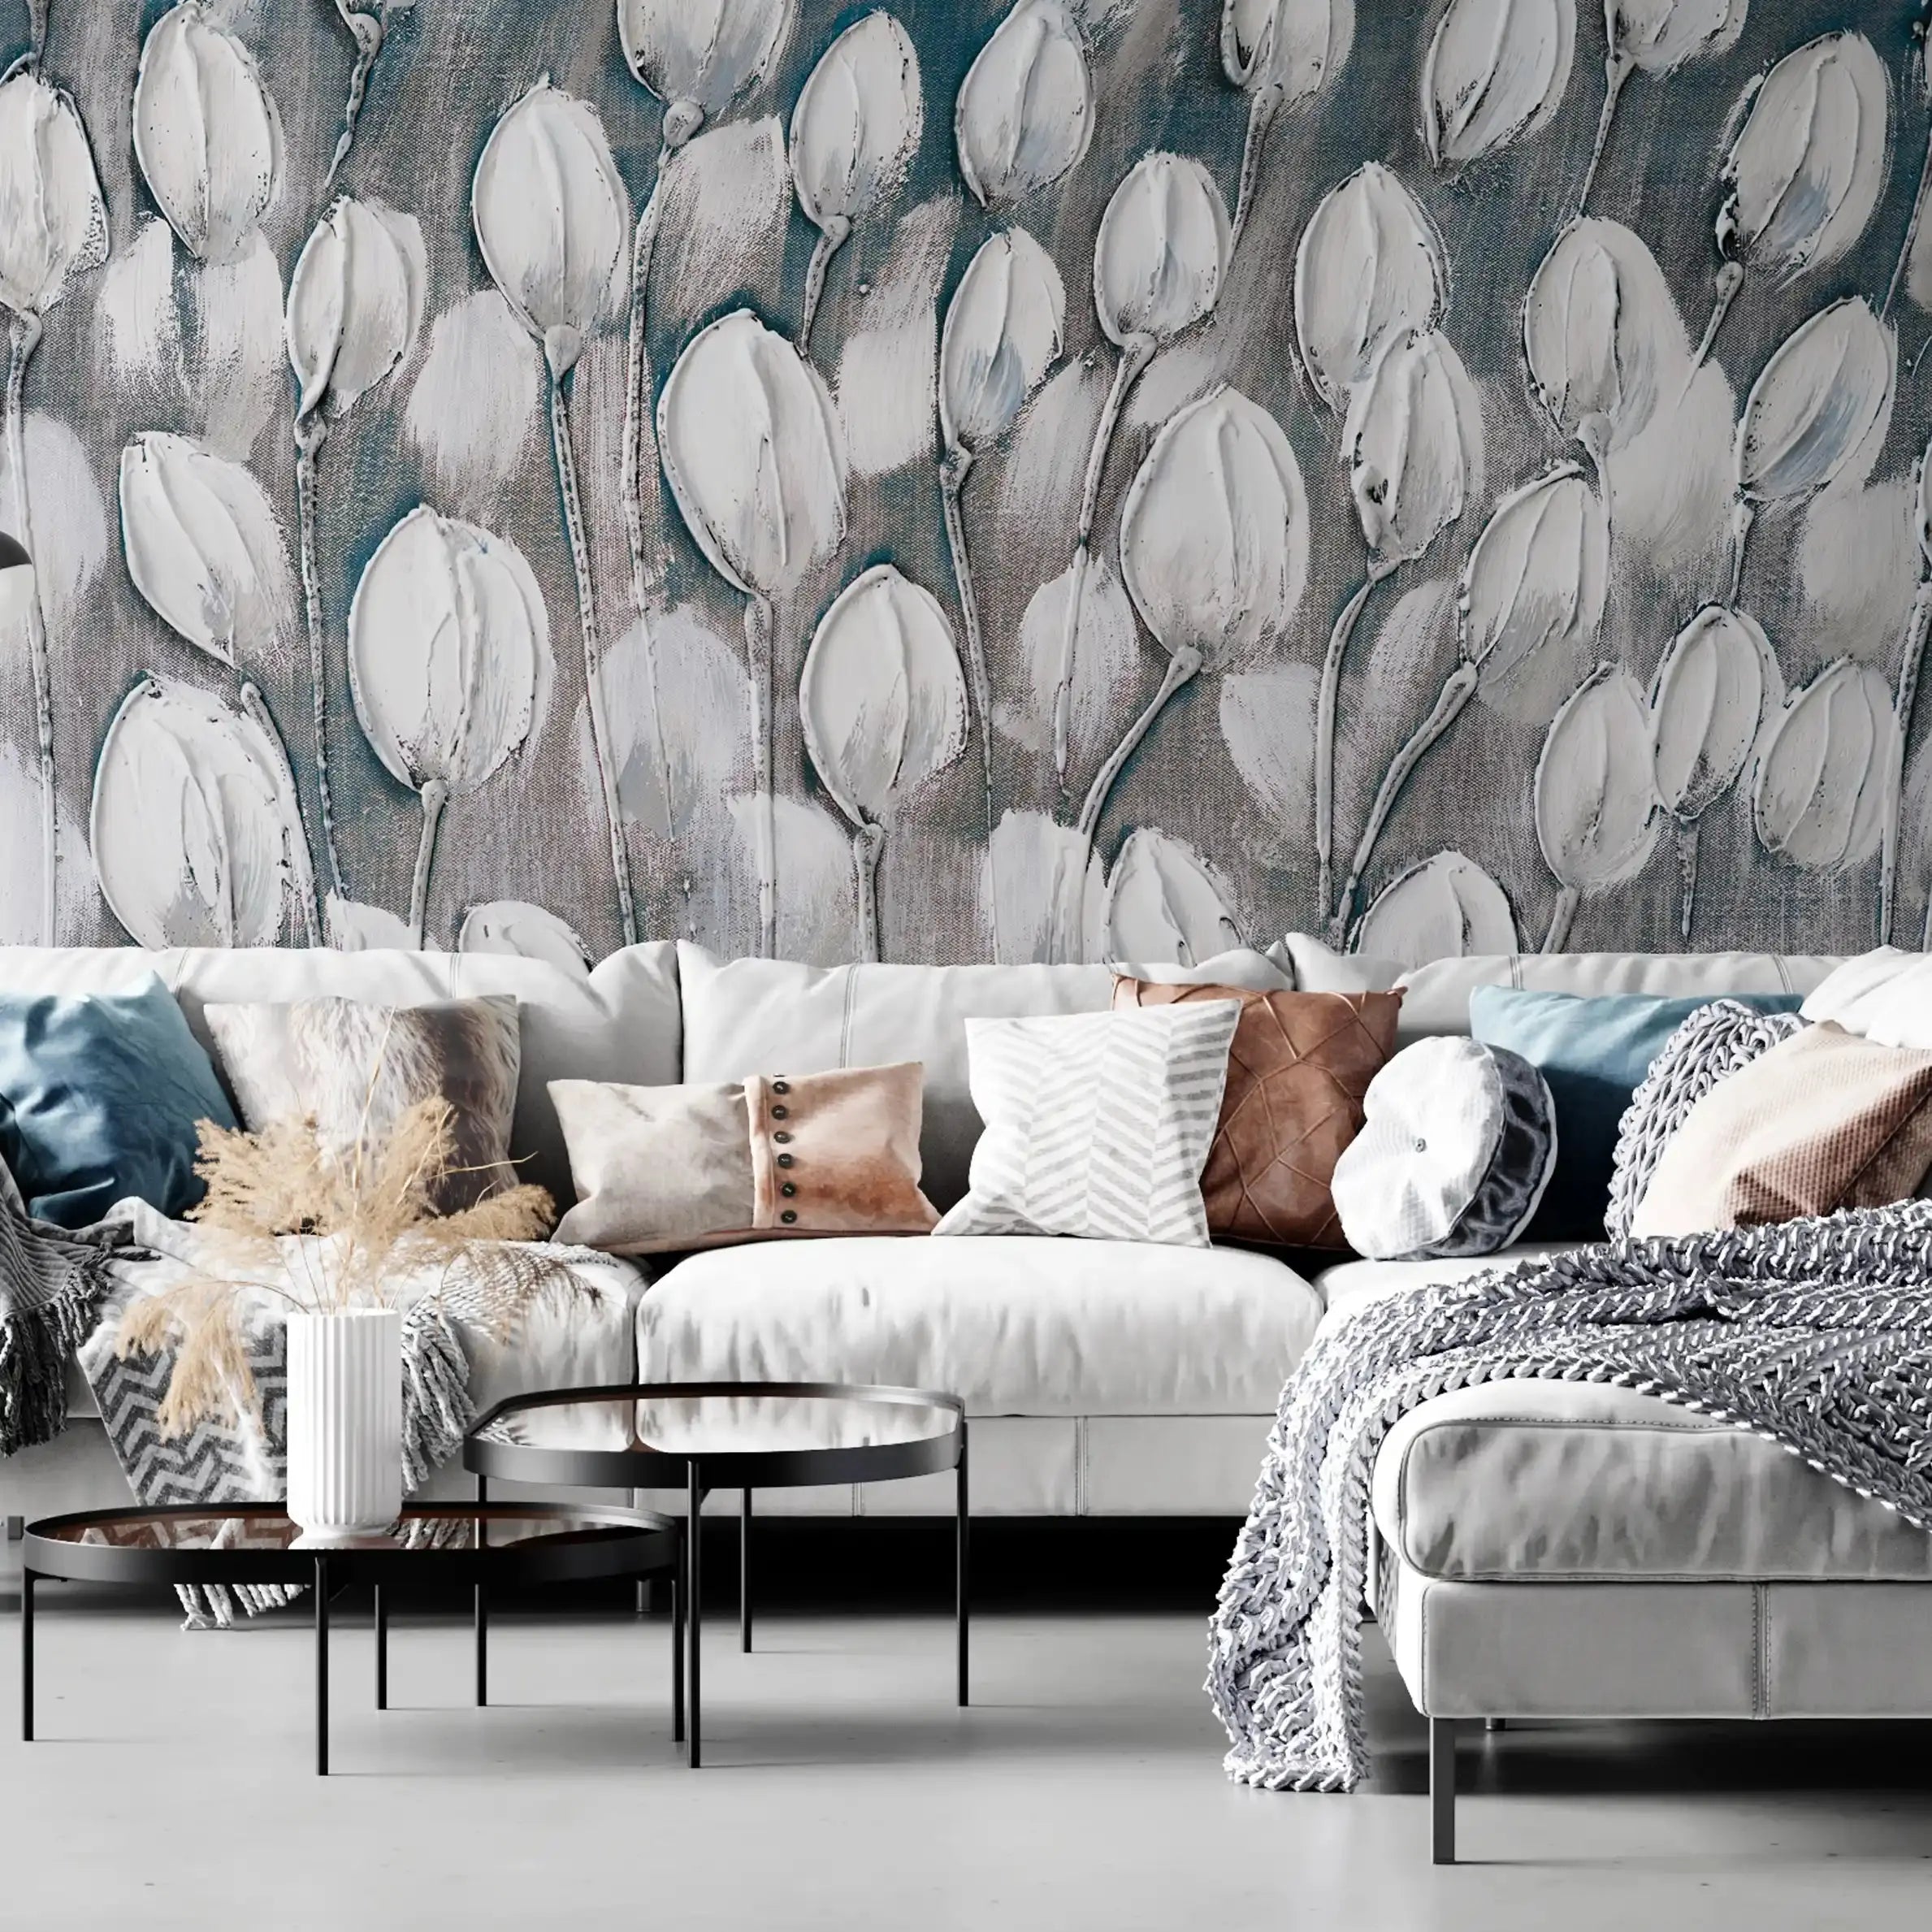 3008-A / Peel and Stick Wallpaper Floral: Silver and White Tulips Design, Perfect Wall Decor for Bathroom and Bedroom - Artevella